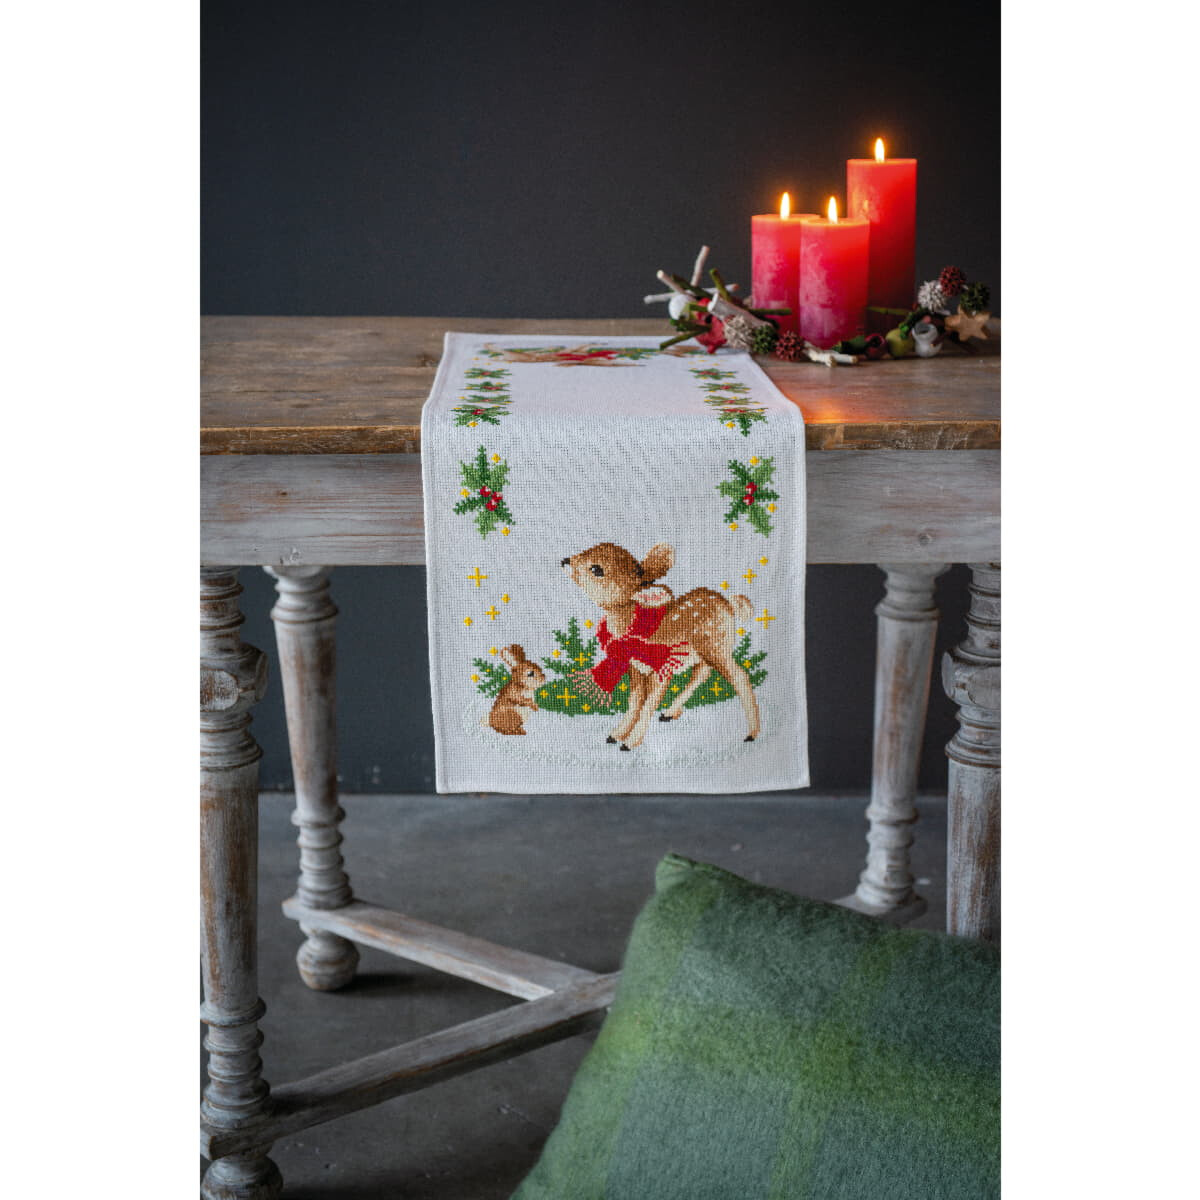 Vervaco counted cross stitch kit tablechloth "Hirsch...